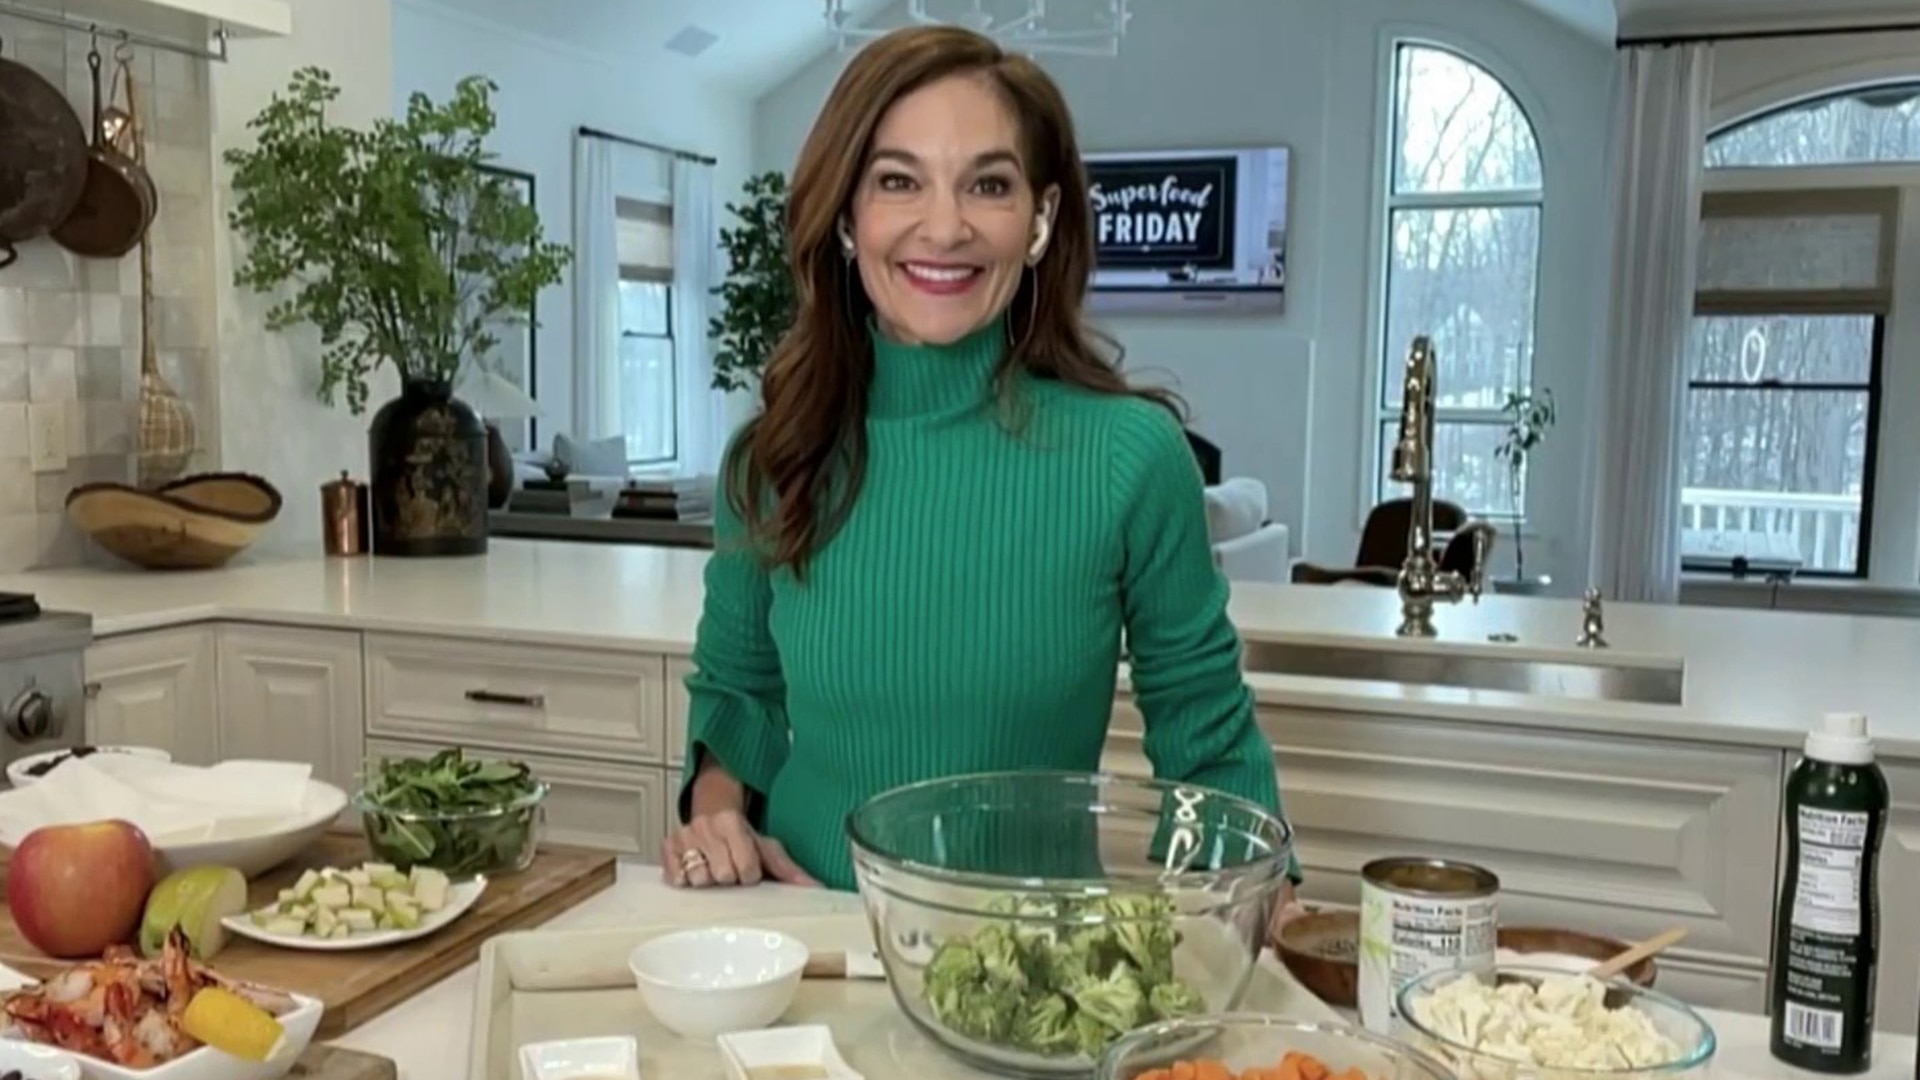 Watch Today Excerpt Superfood Friday Try Joy Bauers Veggie Packed Reboot Bowl 4799